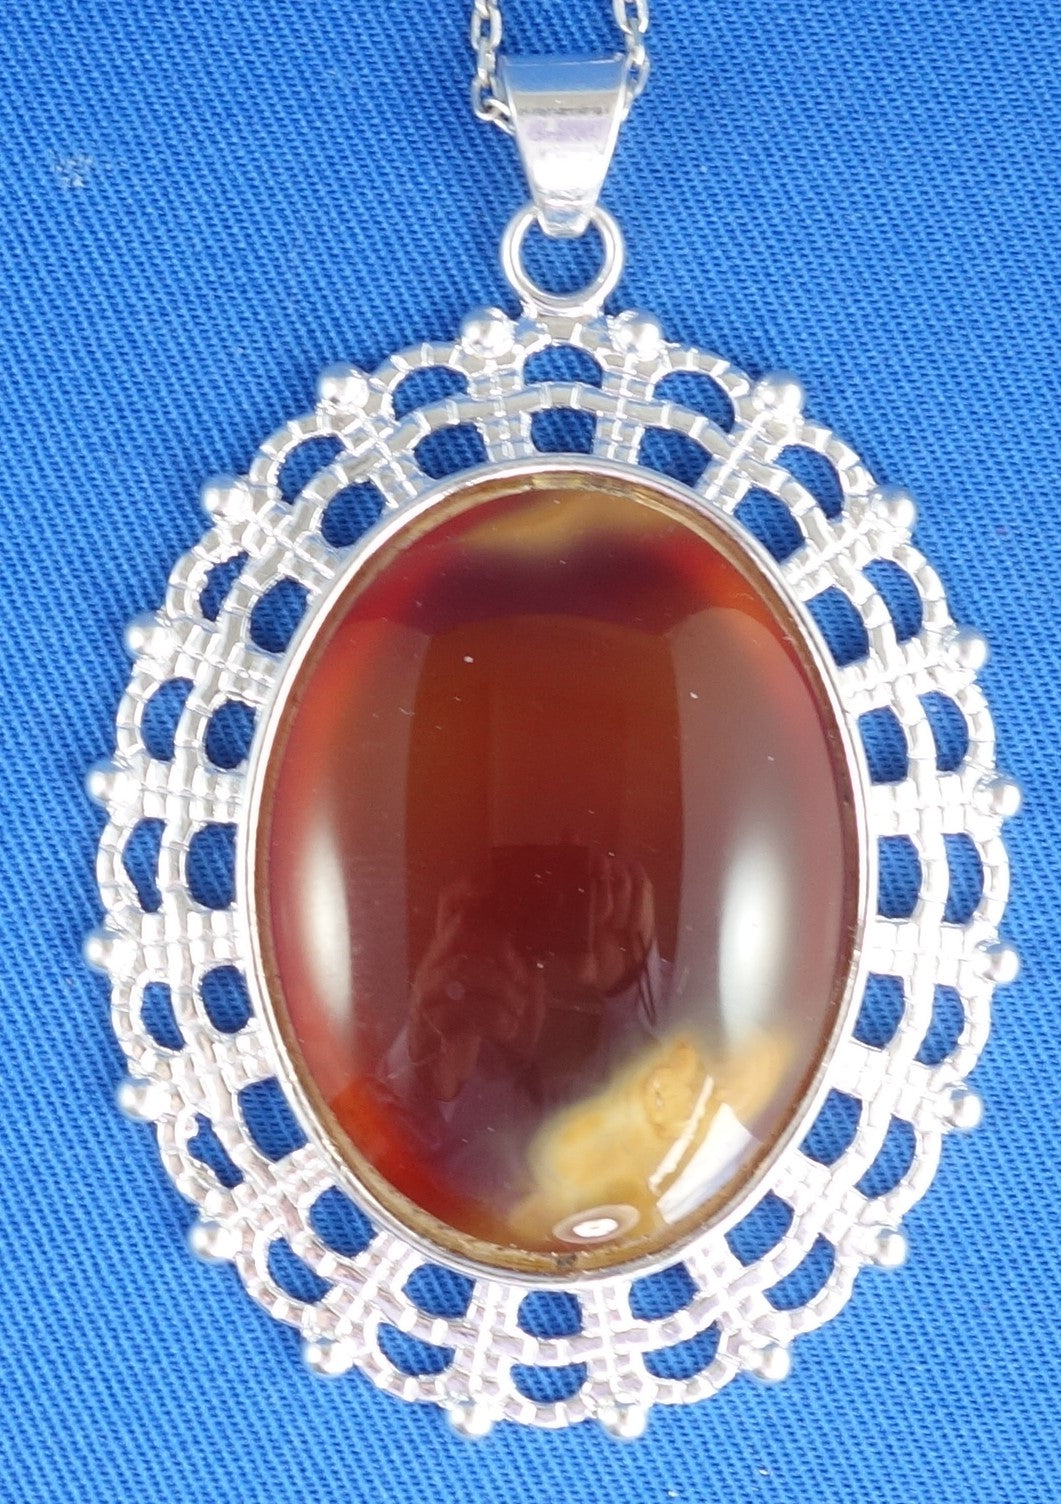 Necklace with large carnelian from Coromandel New Zealand with deep translucent orange color and side swirls of yellow/tan, hand polished to a 40x30mm cabochon and set in silver plated setting with 19 inch chain - on blue background